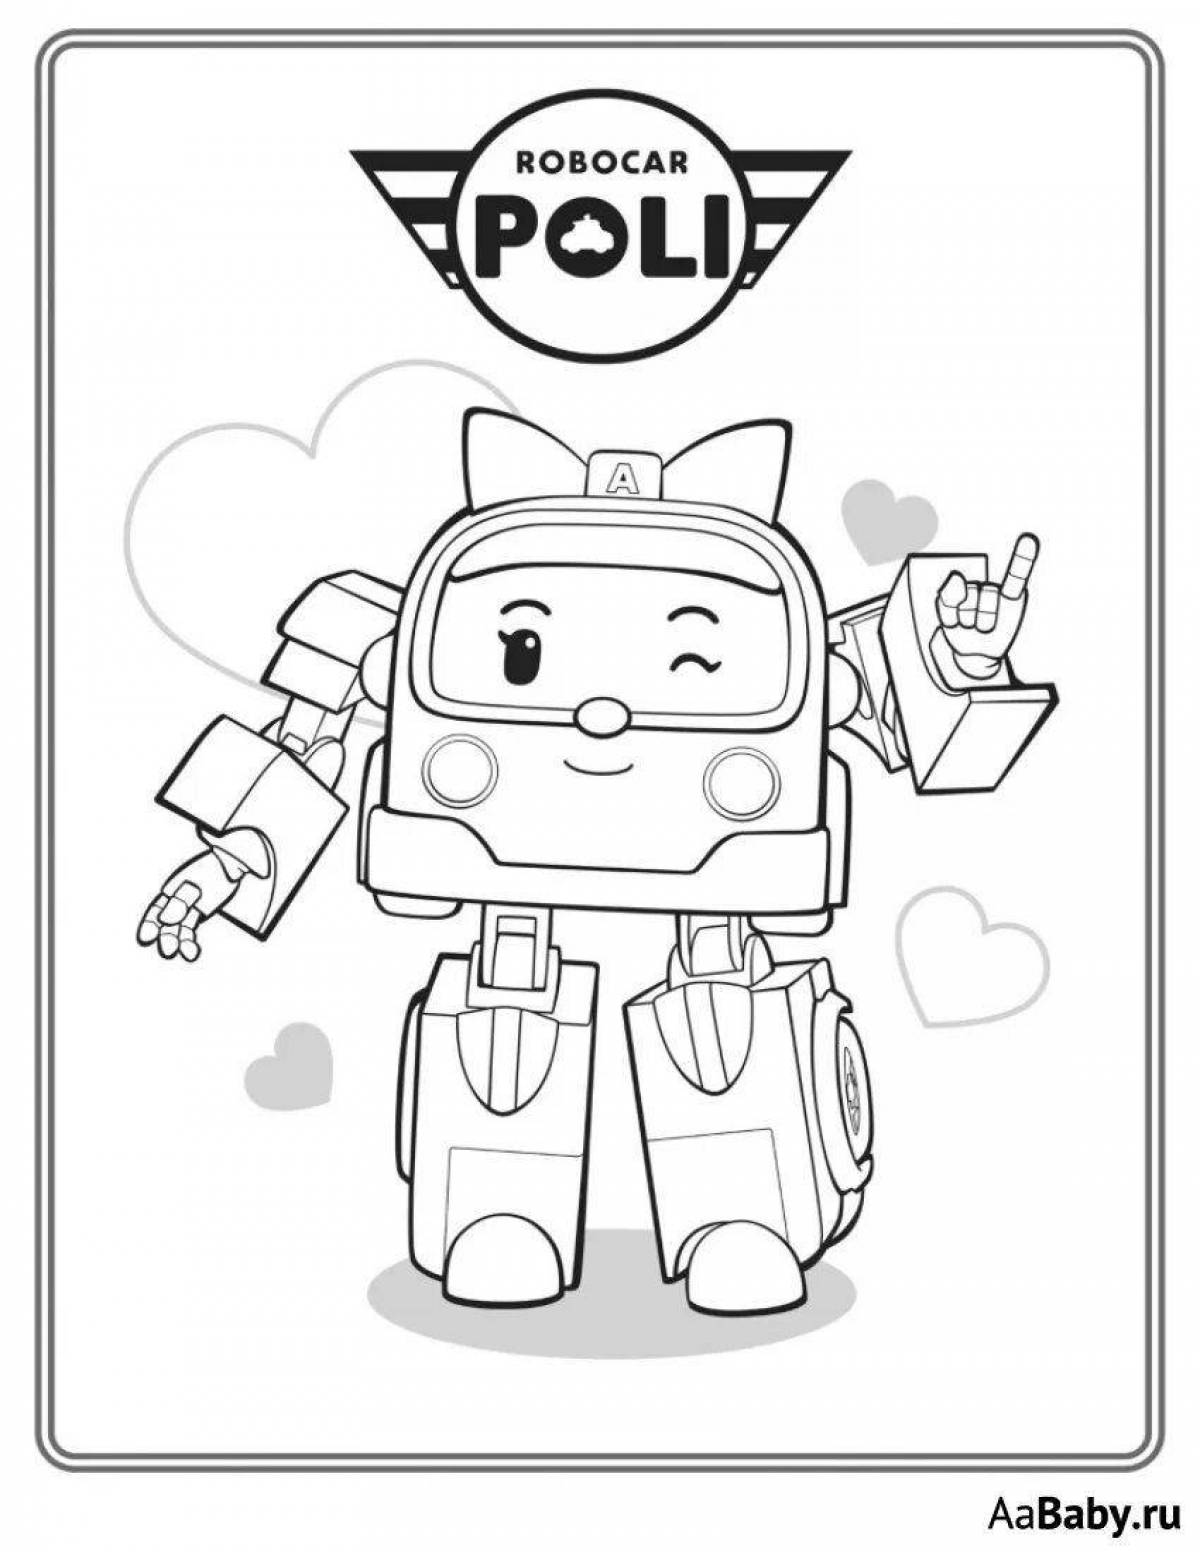 Amber robocar poly's charming coloring book